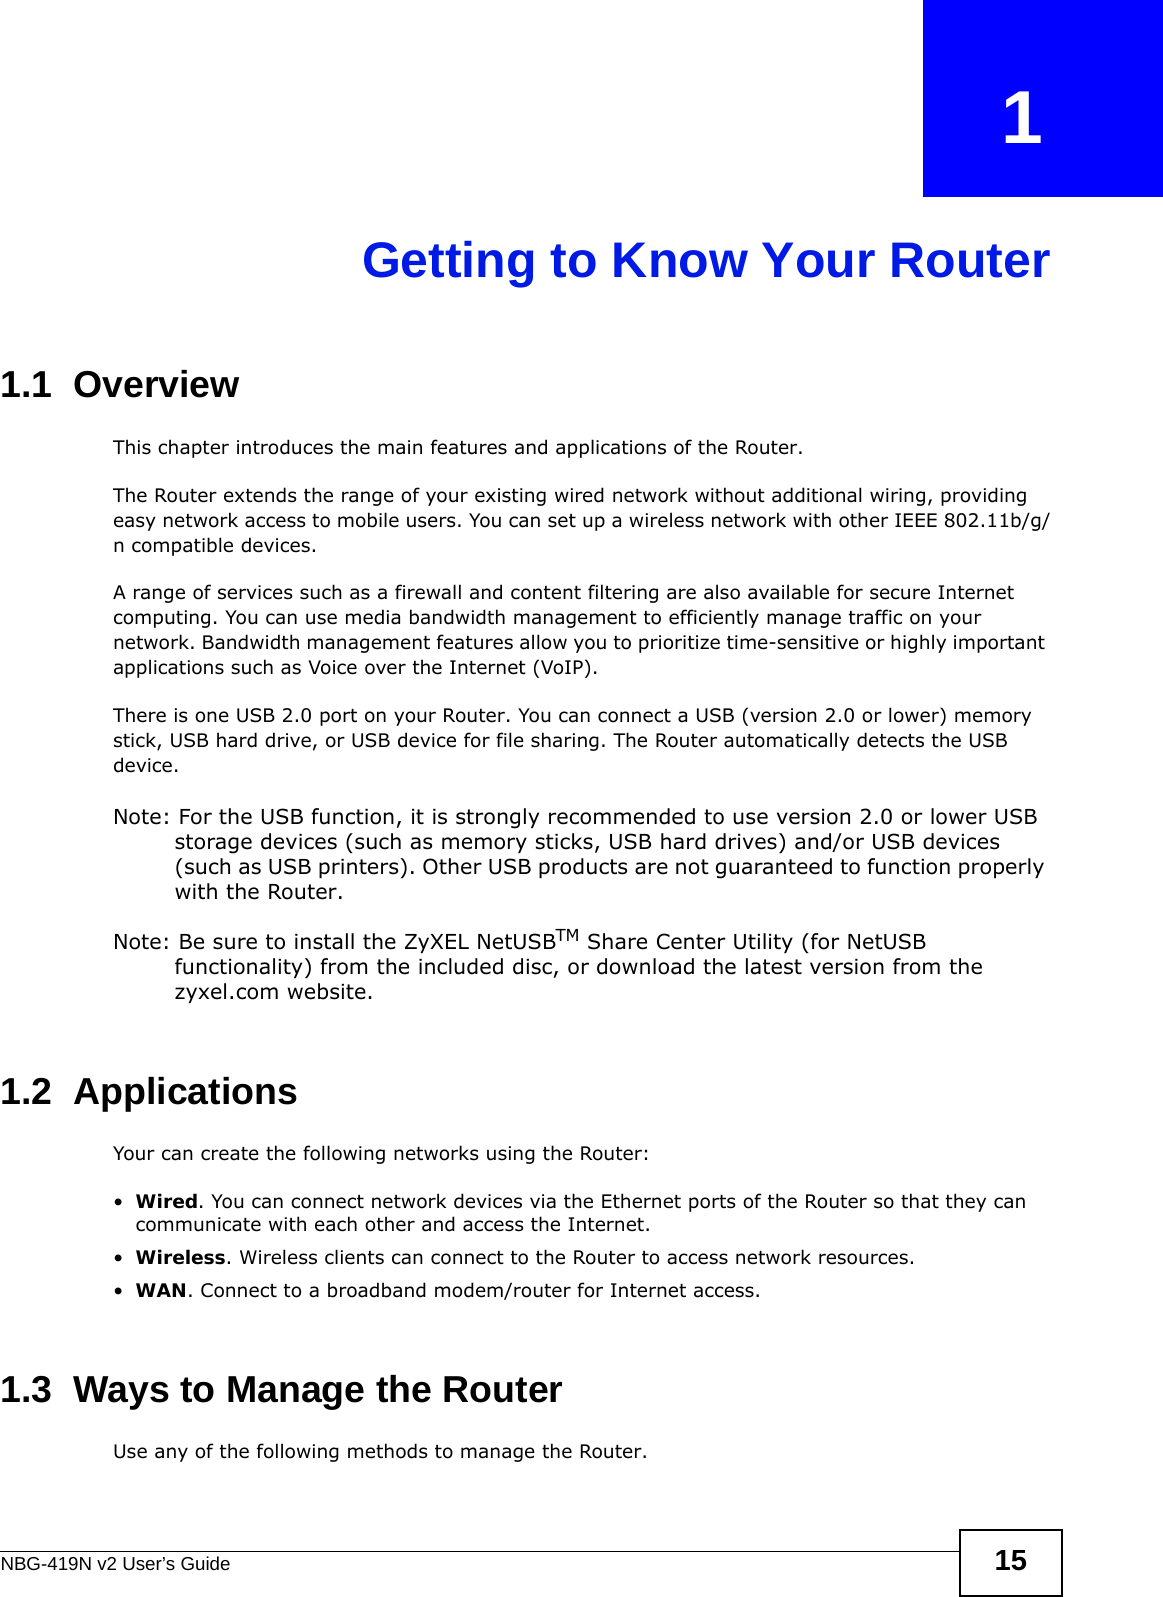 NBG-419N v2 User’s Guide 15CHAPTER   1Getting to Know Your Router1.1  OverviewThis chapter introduces the main features and applications of the Router.The Router extends the range of your existing wired network without additional wiring, providing easy network access to mobile users. You can set up a wireless network with other IEEE 802.11b/g/n compatible devices.A range of services such as a firewall and content filtering are also available for secure Internet computing. You can use media bandwidth management to efficiently manage traffic on your network. Bandwidth management features allow you to prioritize time-sensitive or highly important applications such as Voice over the Internet (VoIP). There is one USB 2.0 port on your Router. You can connect a USB (version 2.0 or lower) memory stick, USB hard drive, or USB device for file sharing. The Router automatically detects the USB device.Note: For the USB function, it is strongly recommended to use version 2.0 or lower USB storage devices (such as memory sticks, USB hard drives) and/or USB devices (such as USB printers). Other USB products are not guaranteed to function properly with the Router.Note: Be sure to install the ZyXEL NetUSBTM Share Center Utility (for NetUSB functionality) from the included disc, or download the latest version from the zyxel.com website.1.2  ApplicationsYour can create the following networks using the Router:•Wired. You can connect network devices via the Ethernet ports of the Router so that they can communicate with each other and access the Internet.•Wireless. Wireless clients can connect to the Router to access network resources.•WAN. Connect to a broadband modem/router for Internet access. 1.3  Ways to Manage the RouterUse any of the following methods to manage the Router.